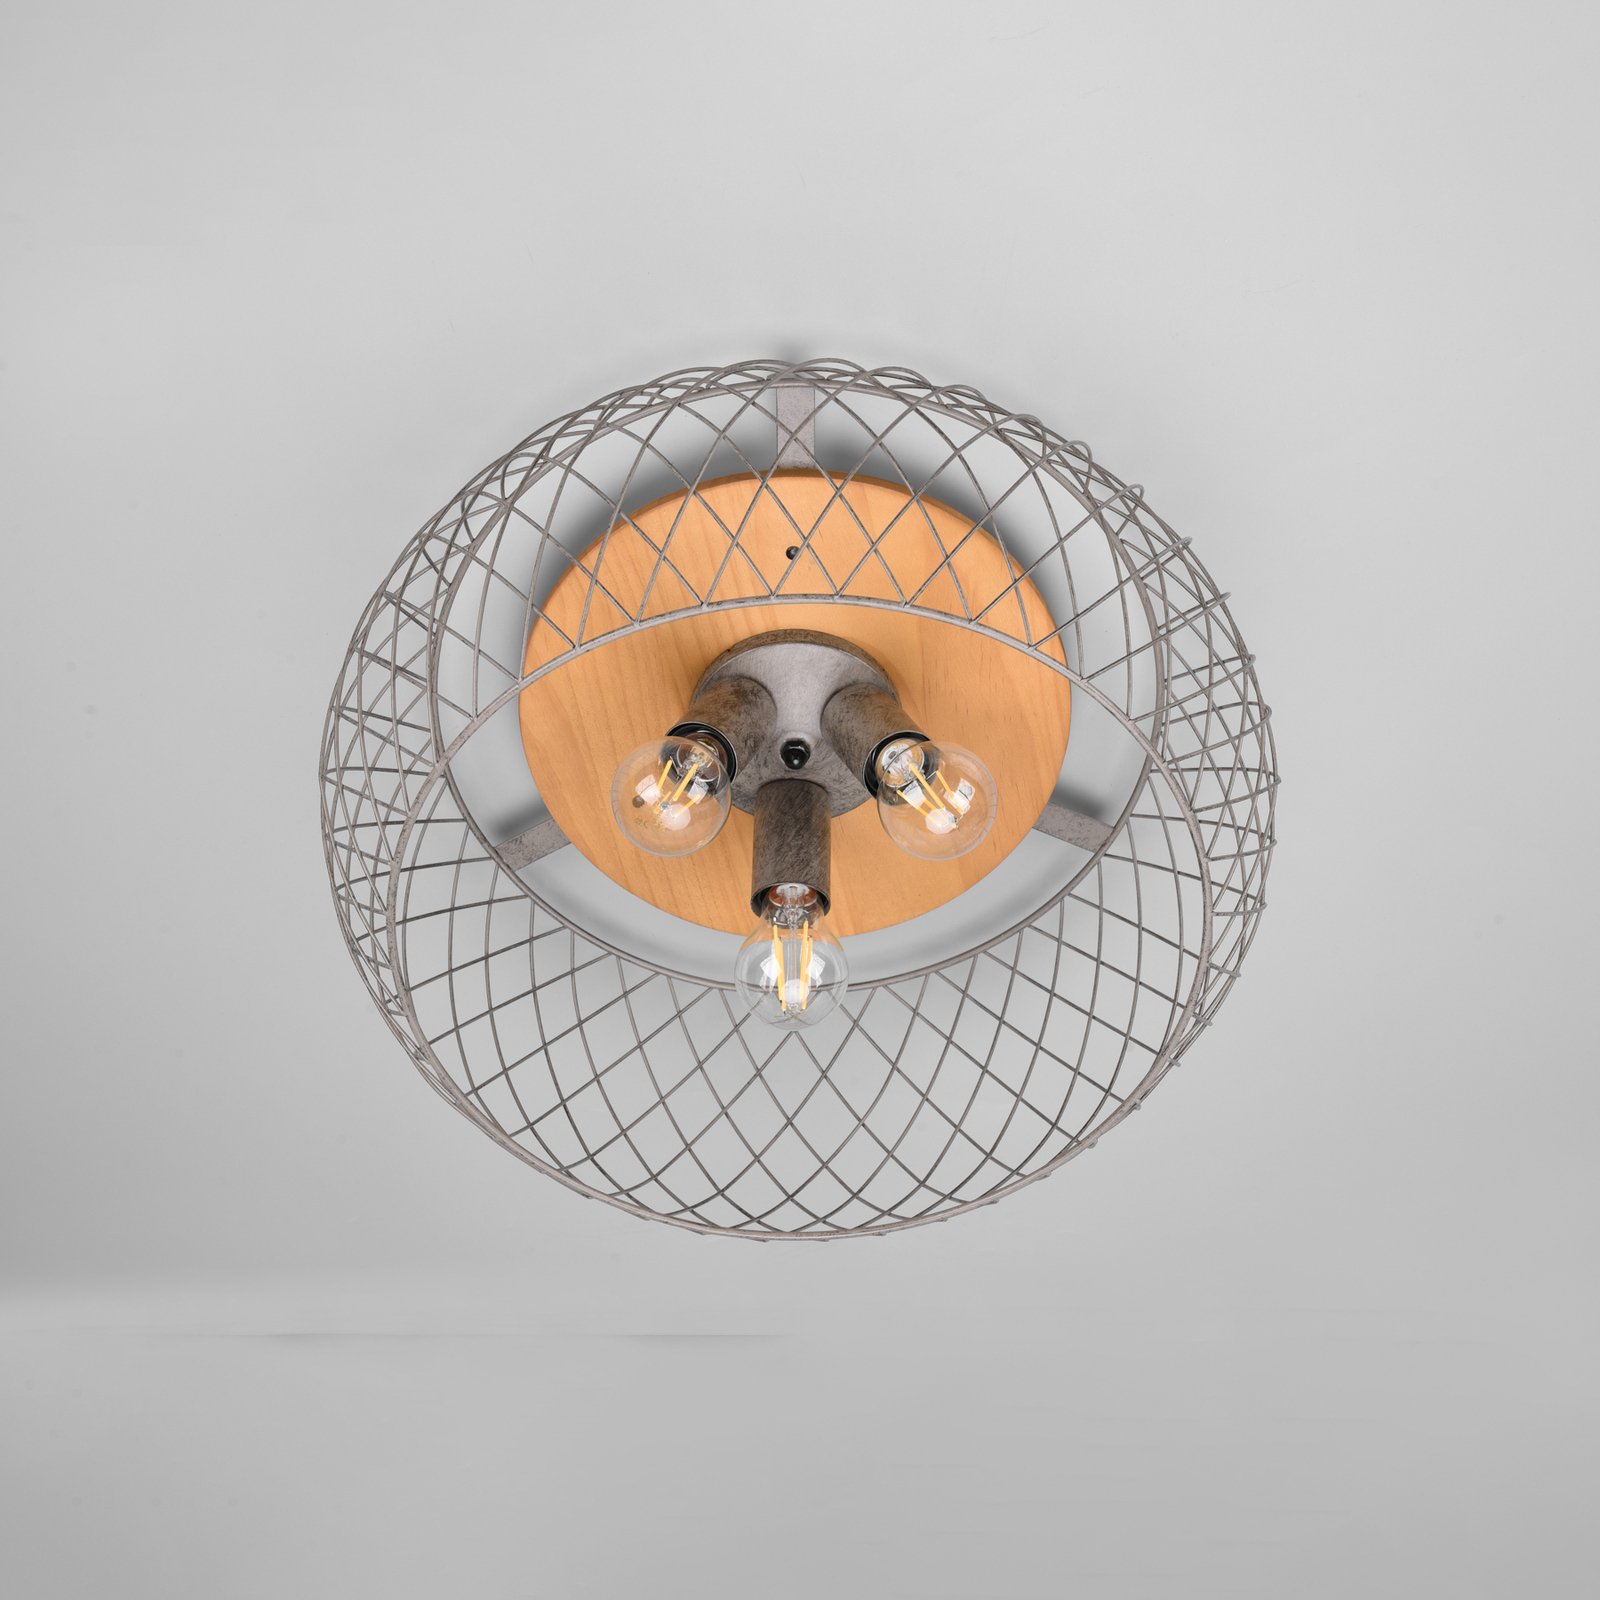 Tamil ceiling lamp with antique nickel cage shade